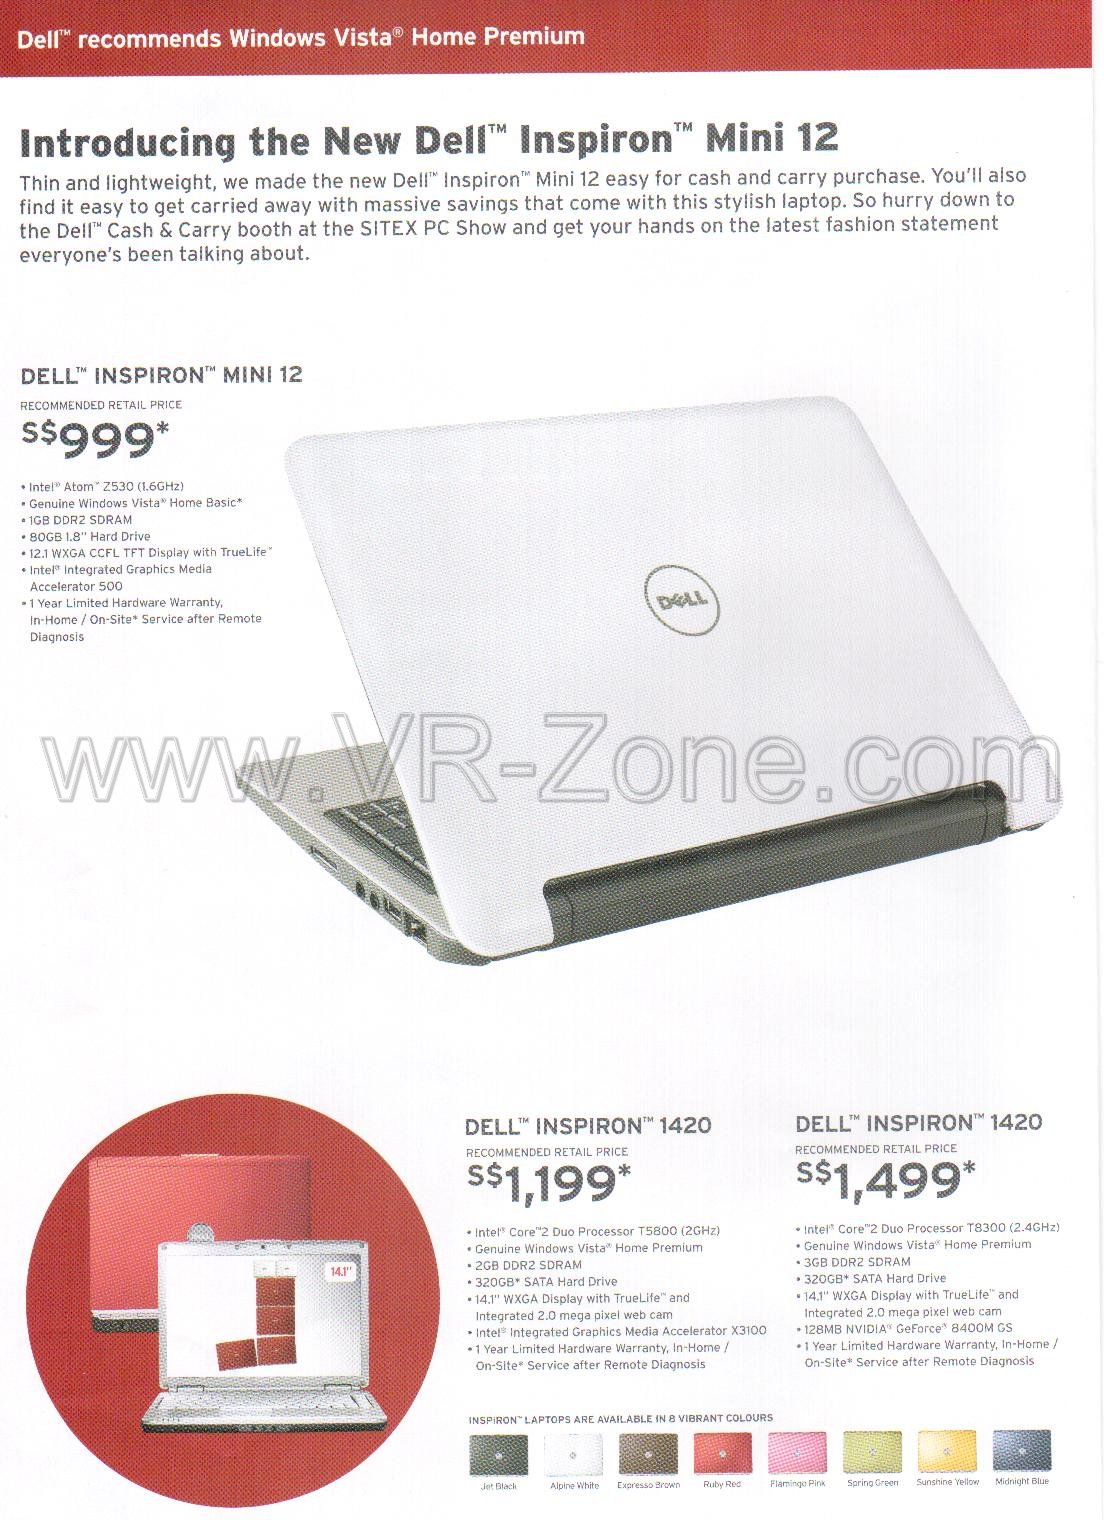 Sitex 2008 price list image brochure of Dell Inspiron Notebooks 3